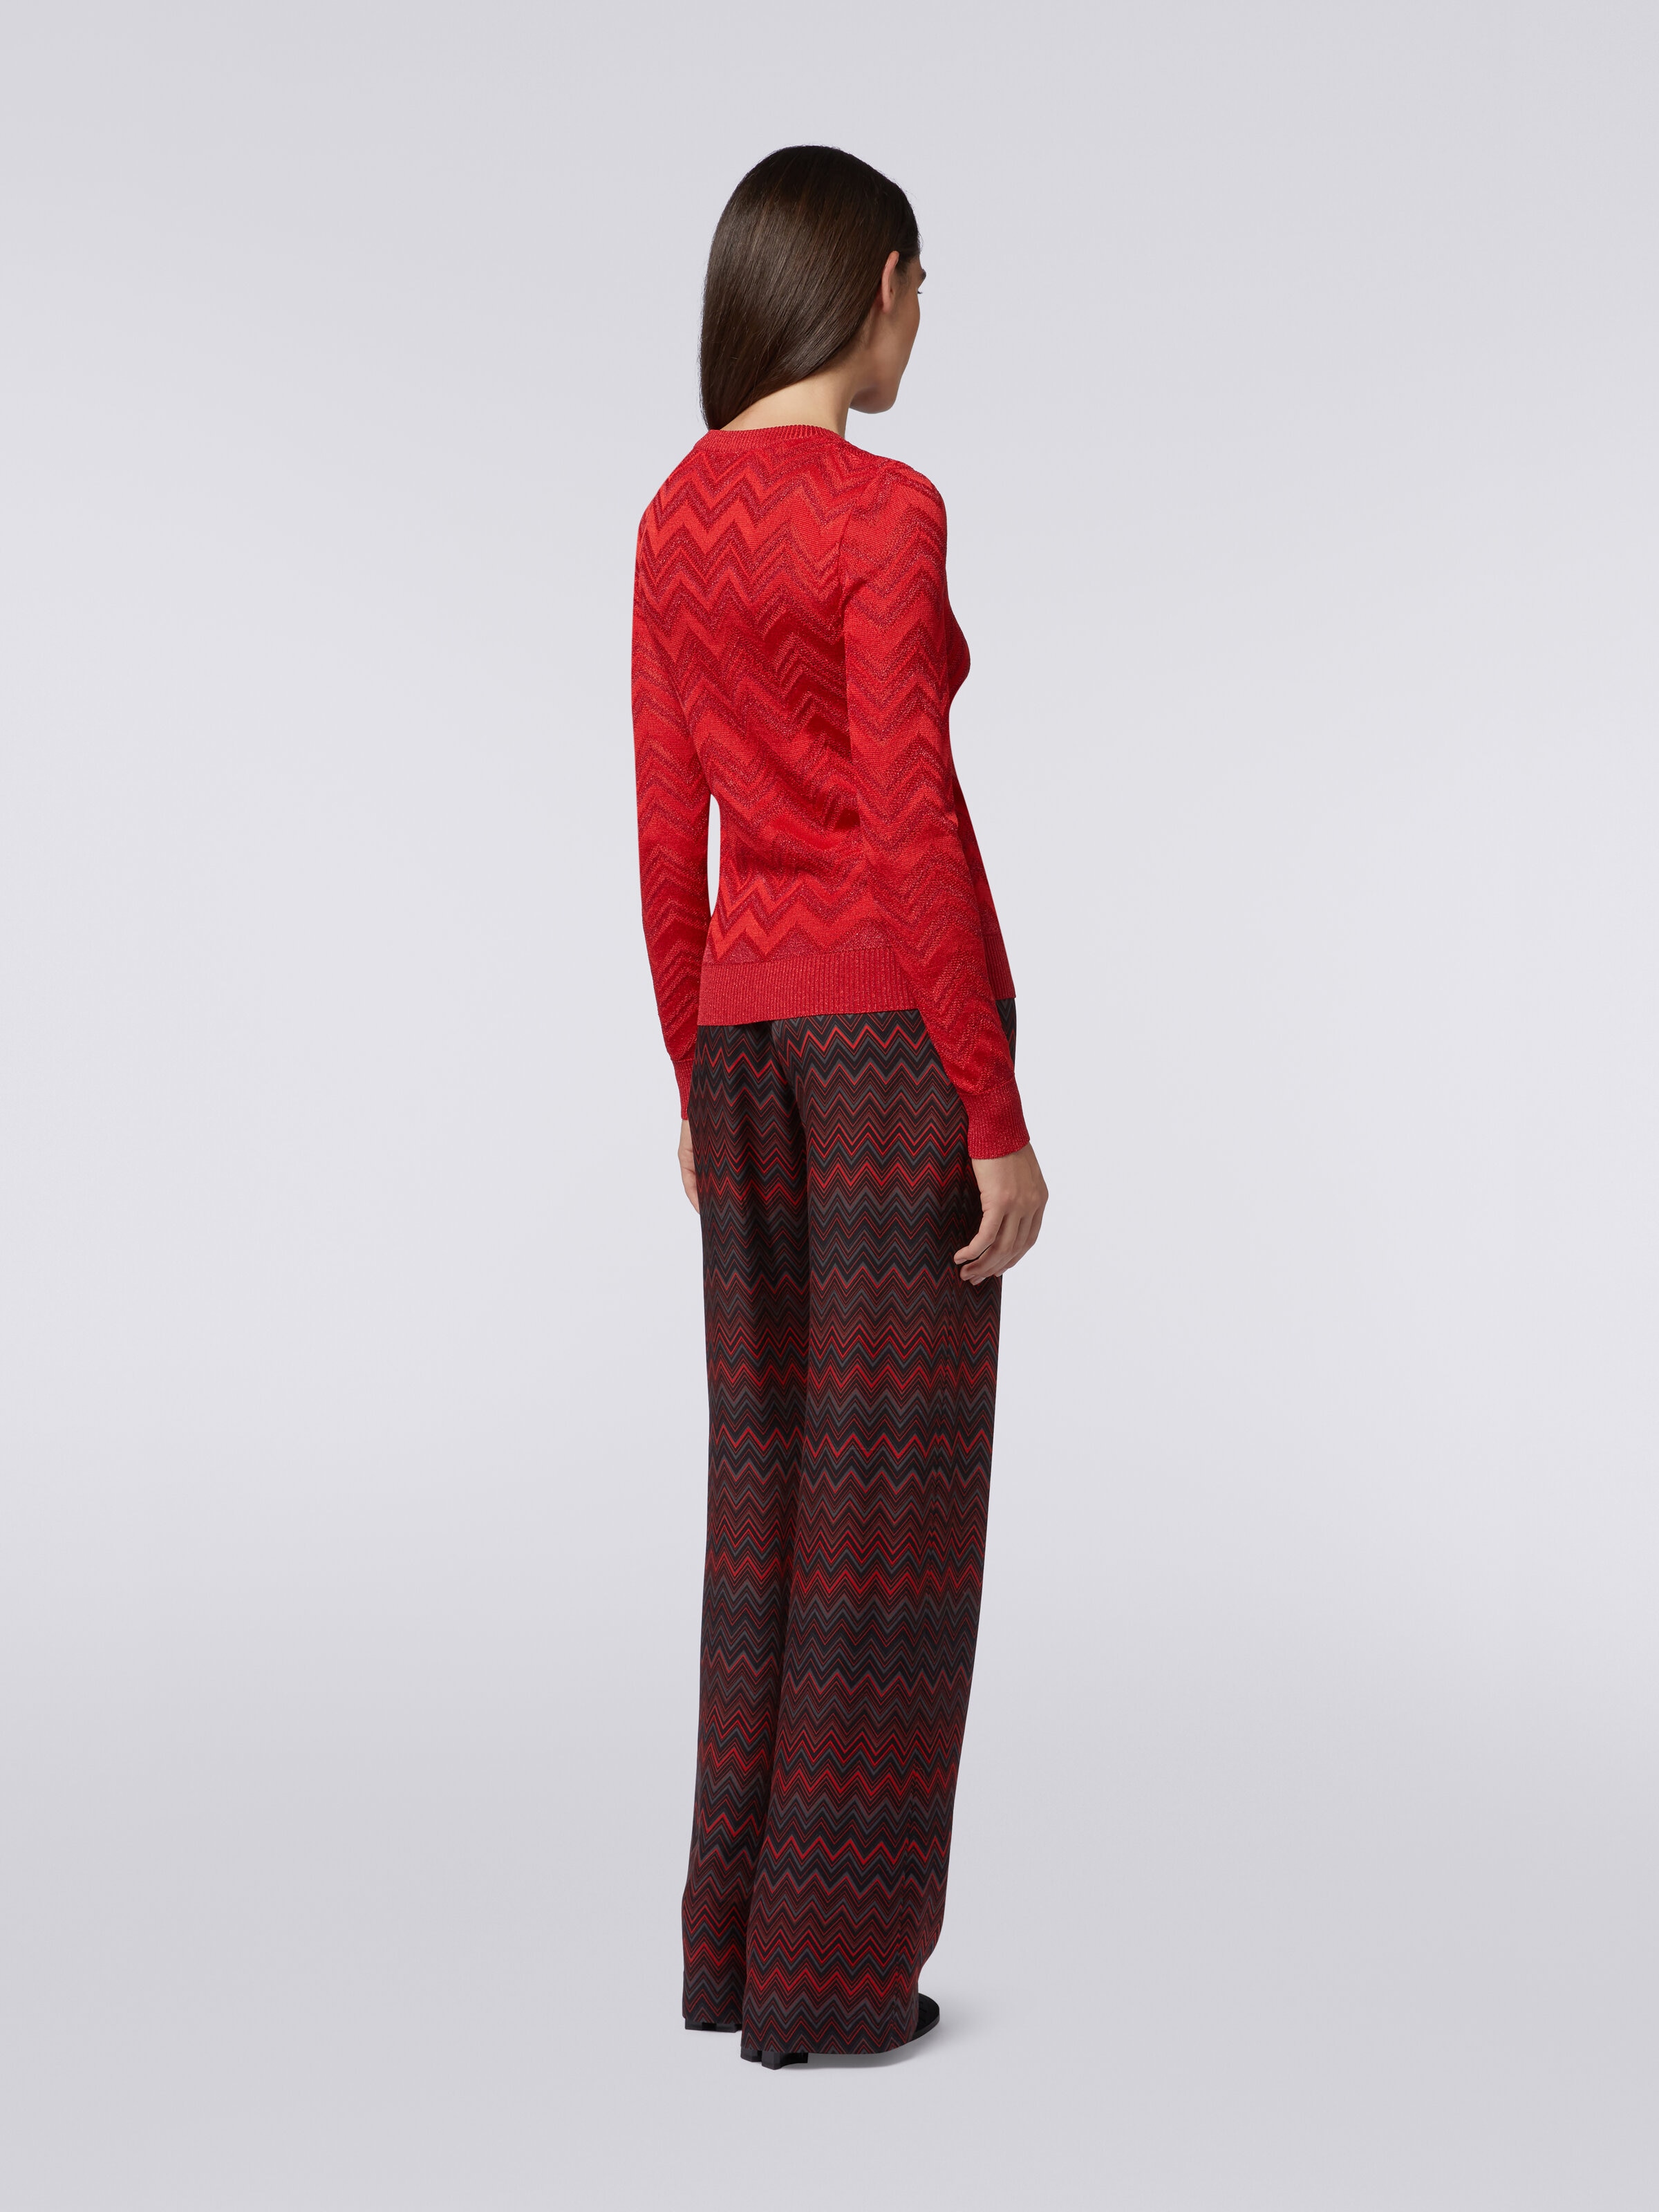 Cardigan in tonal zigzag knit with lurex, Red  - 3